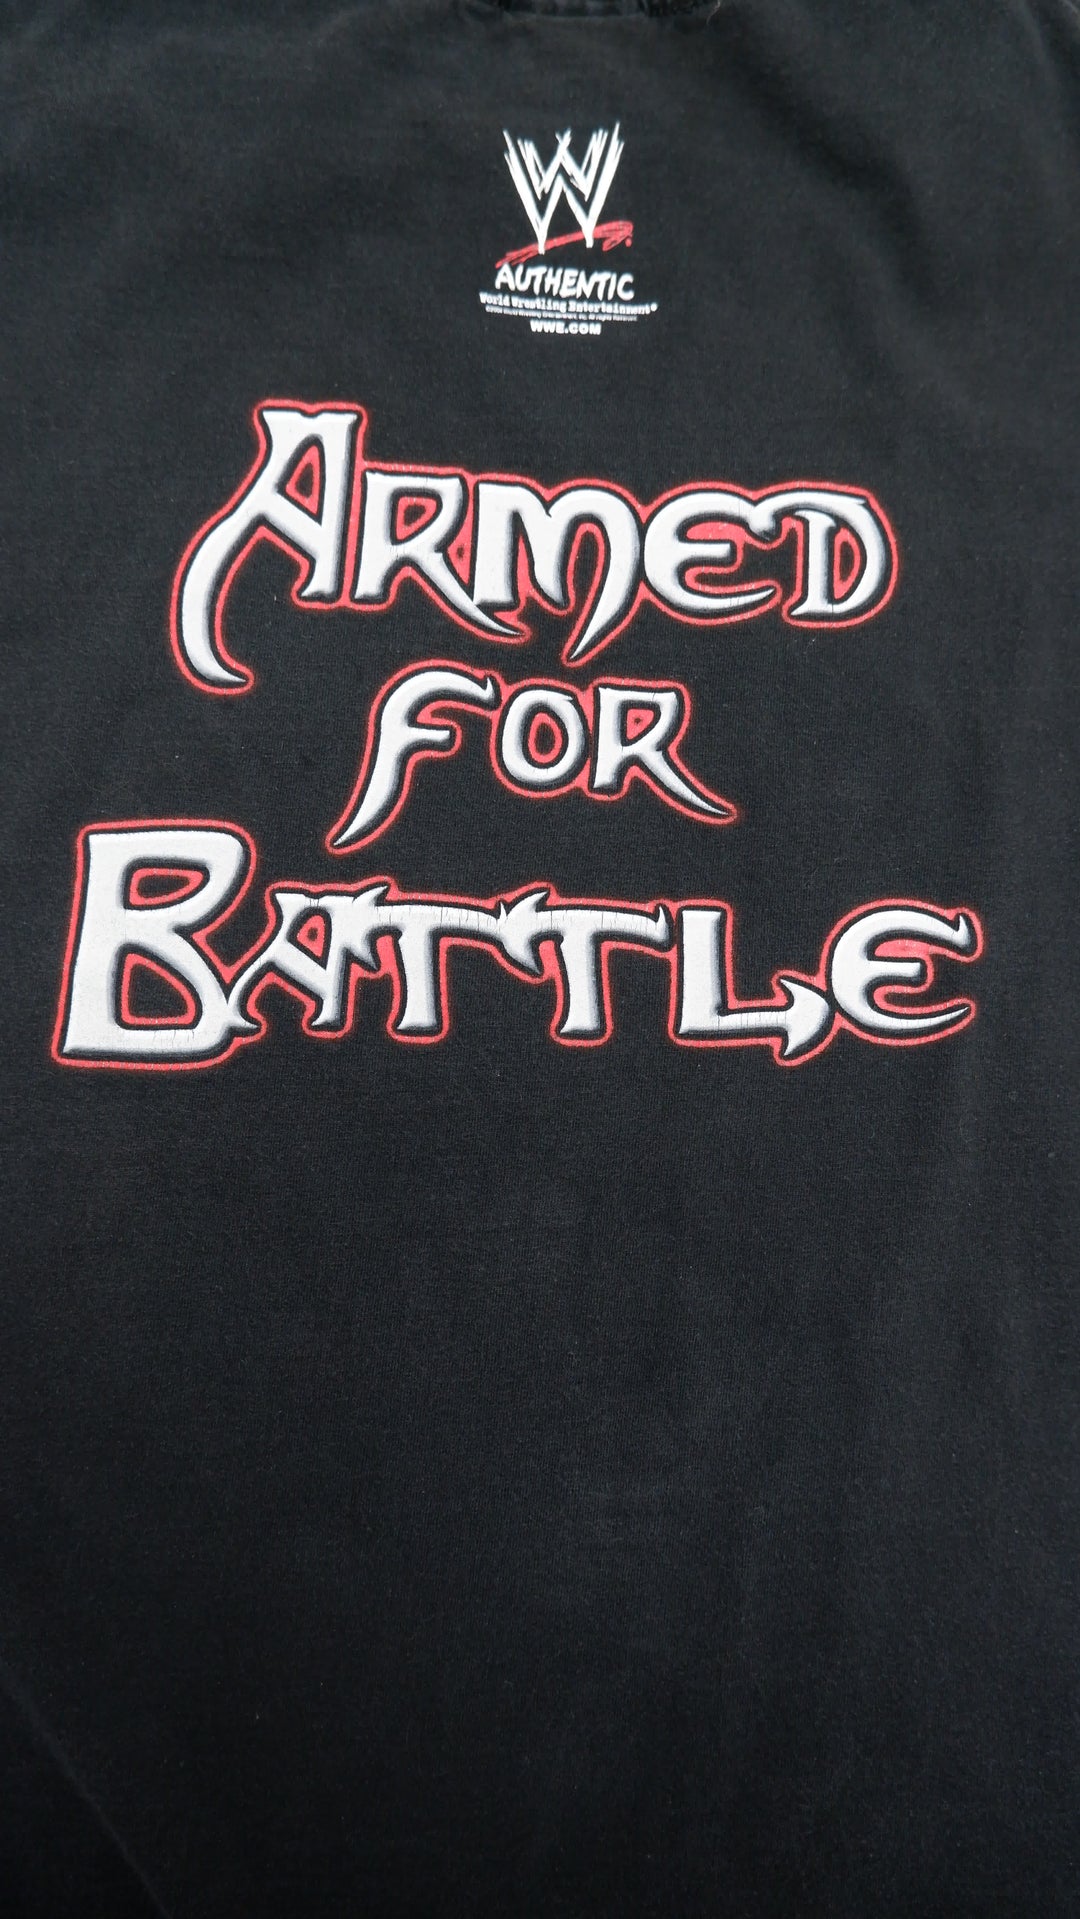 Vintage WWE True Source Of Strength Armed For Battle T-Shirt